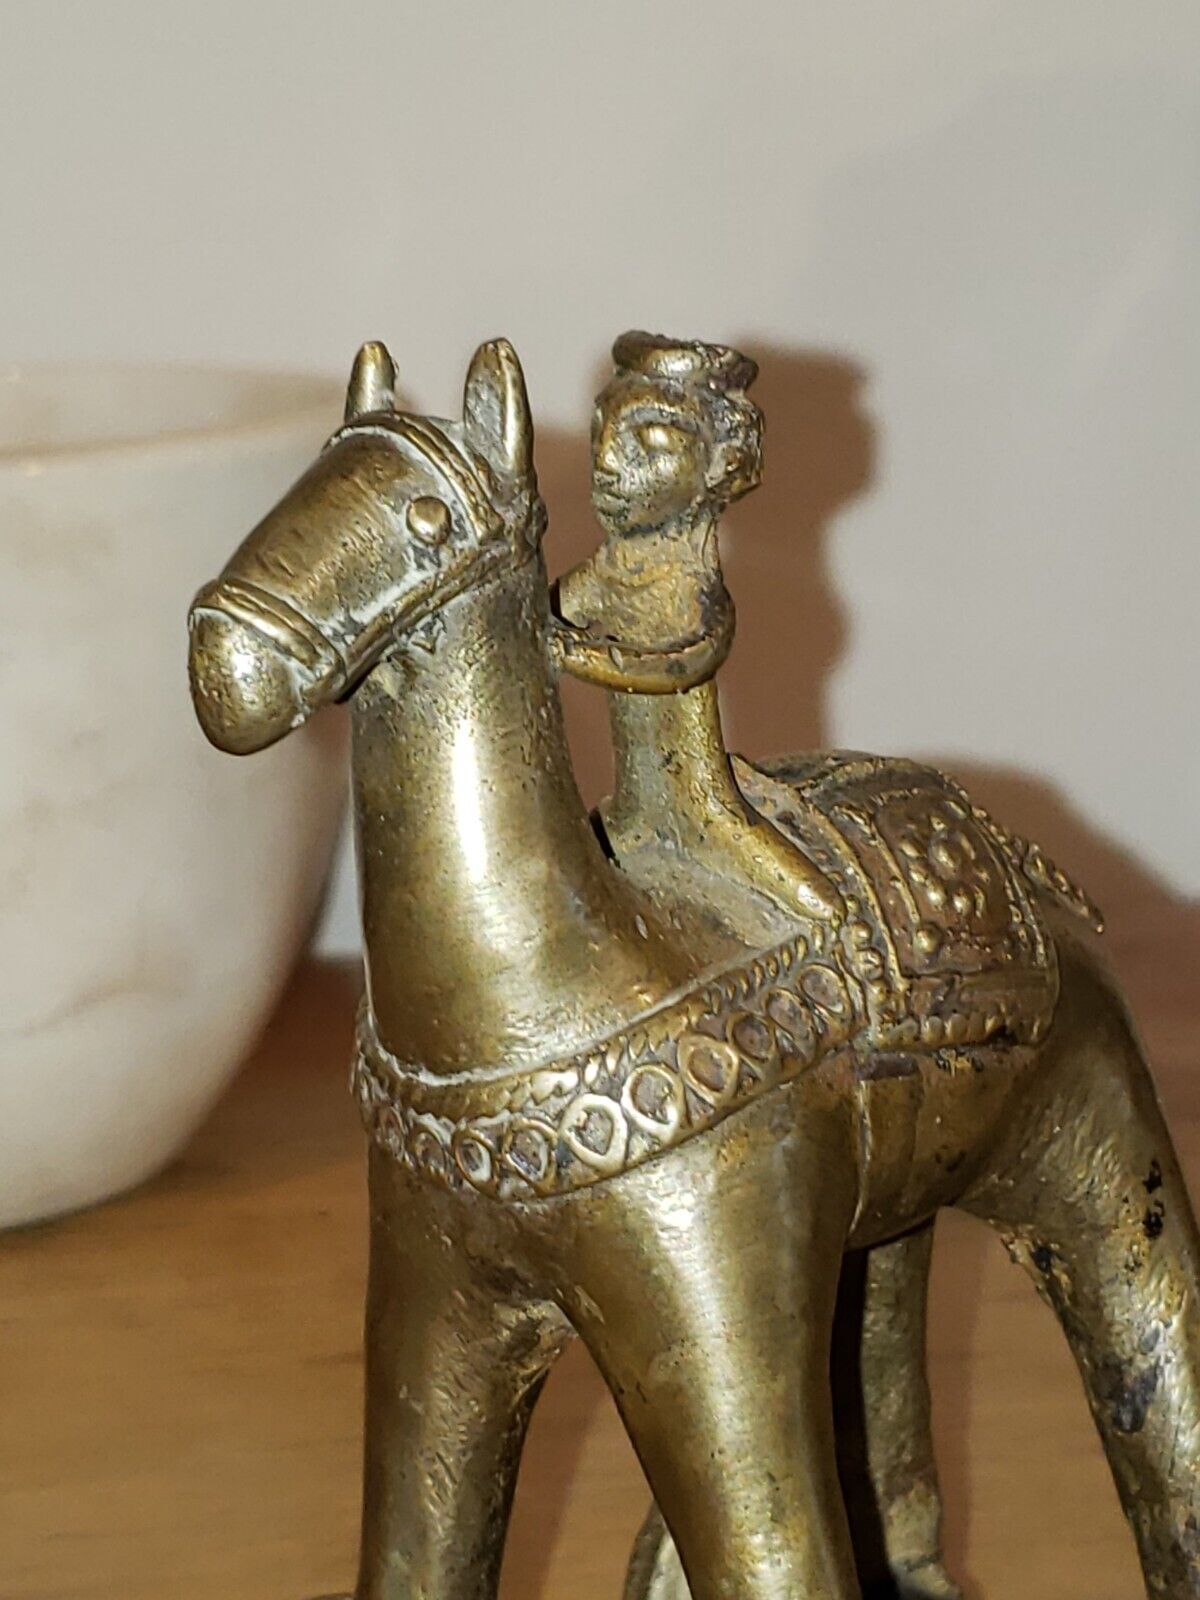 Vintage Brass India Temple Toy Horse on Wheels With Rider, Wheels Still Work